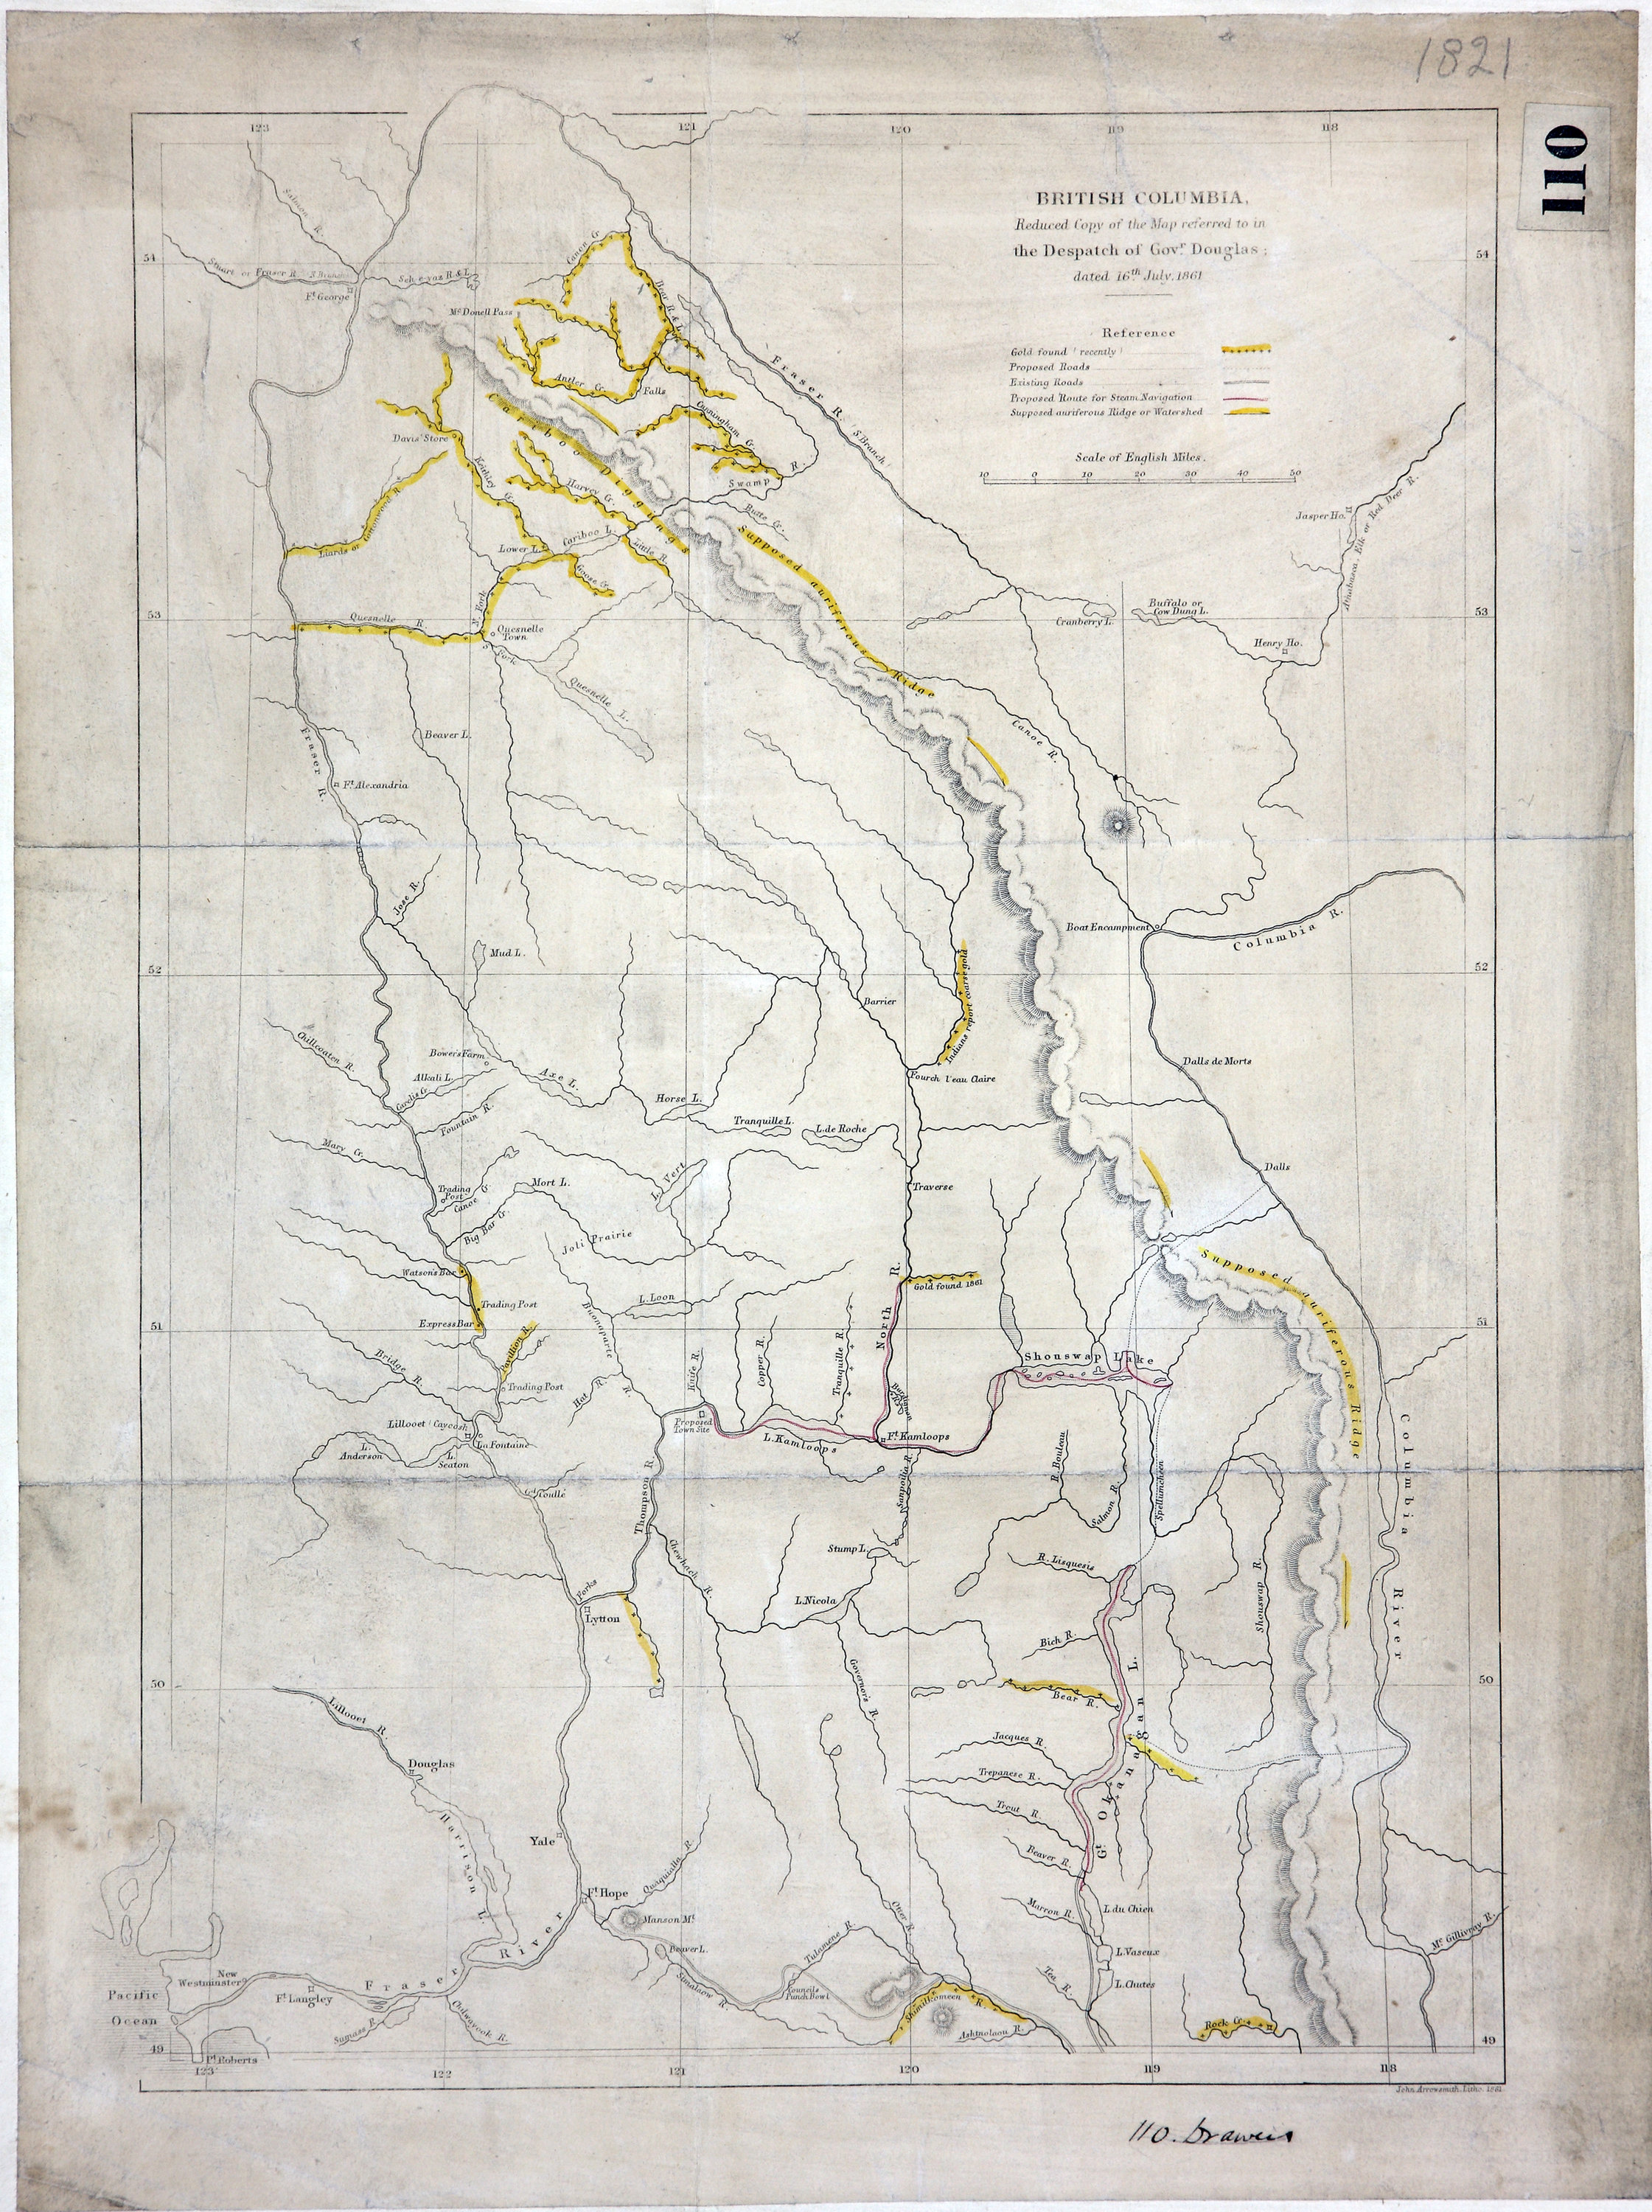 British Columbia, reduced copy of the map referred to in the despatch of Governor Douglas of 16 July 1861.